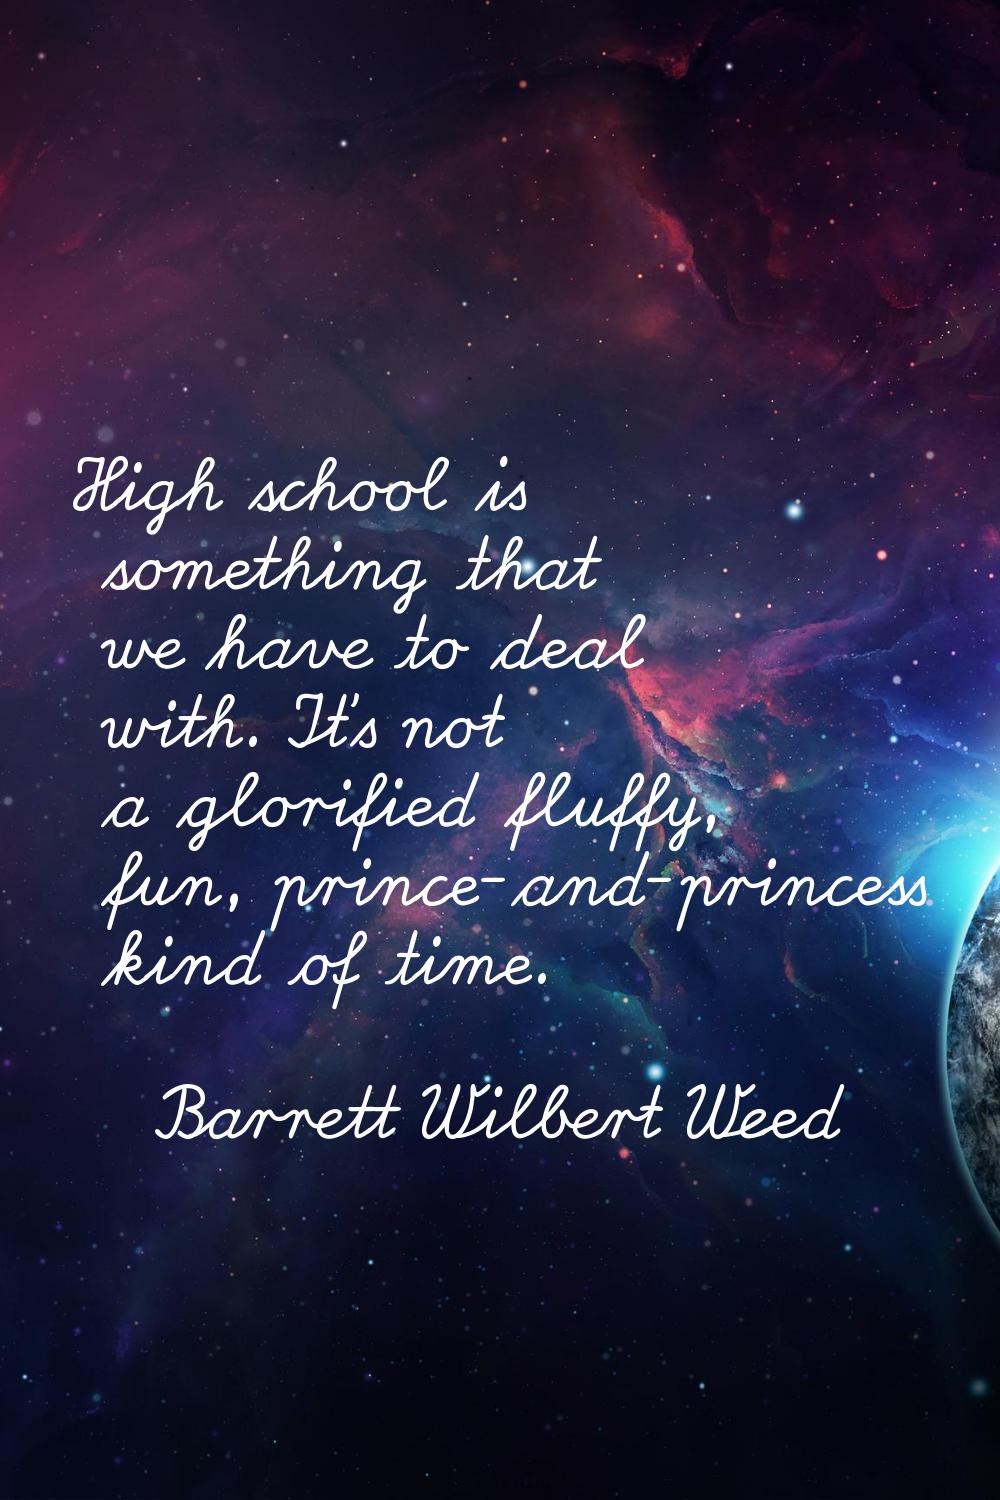 High school is something that we have to deal with. It's not a glorified fluffy, fun, prince-and-pr